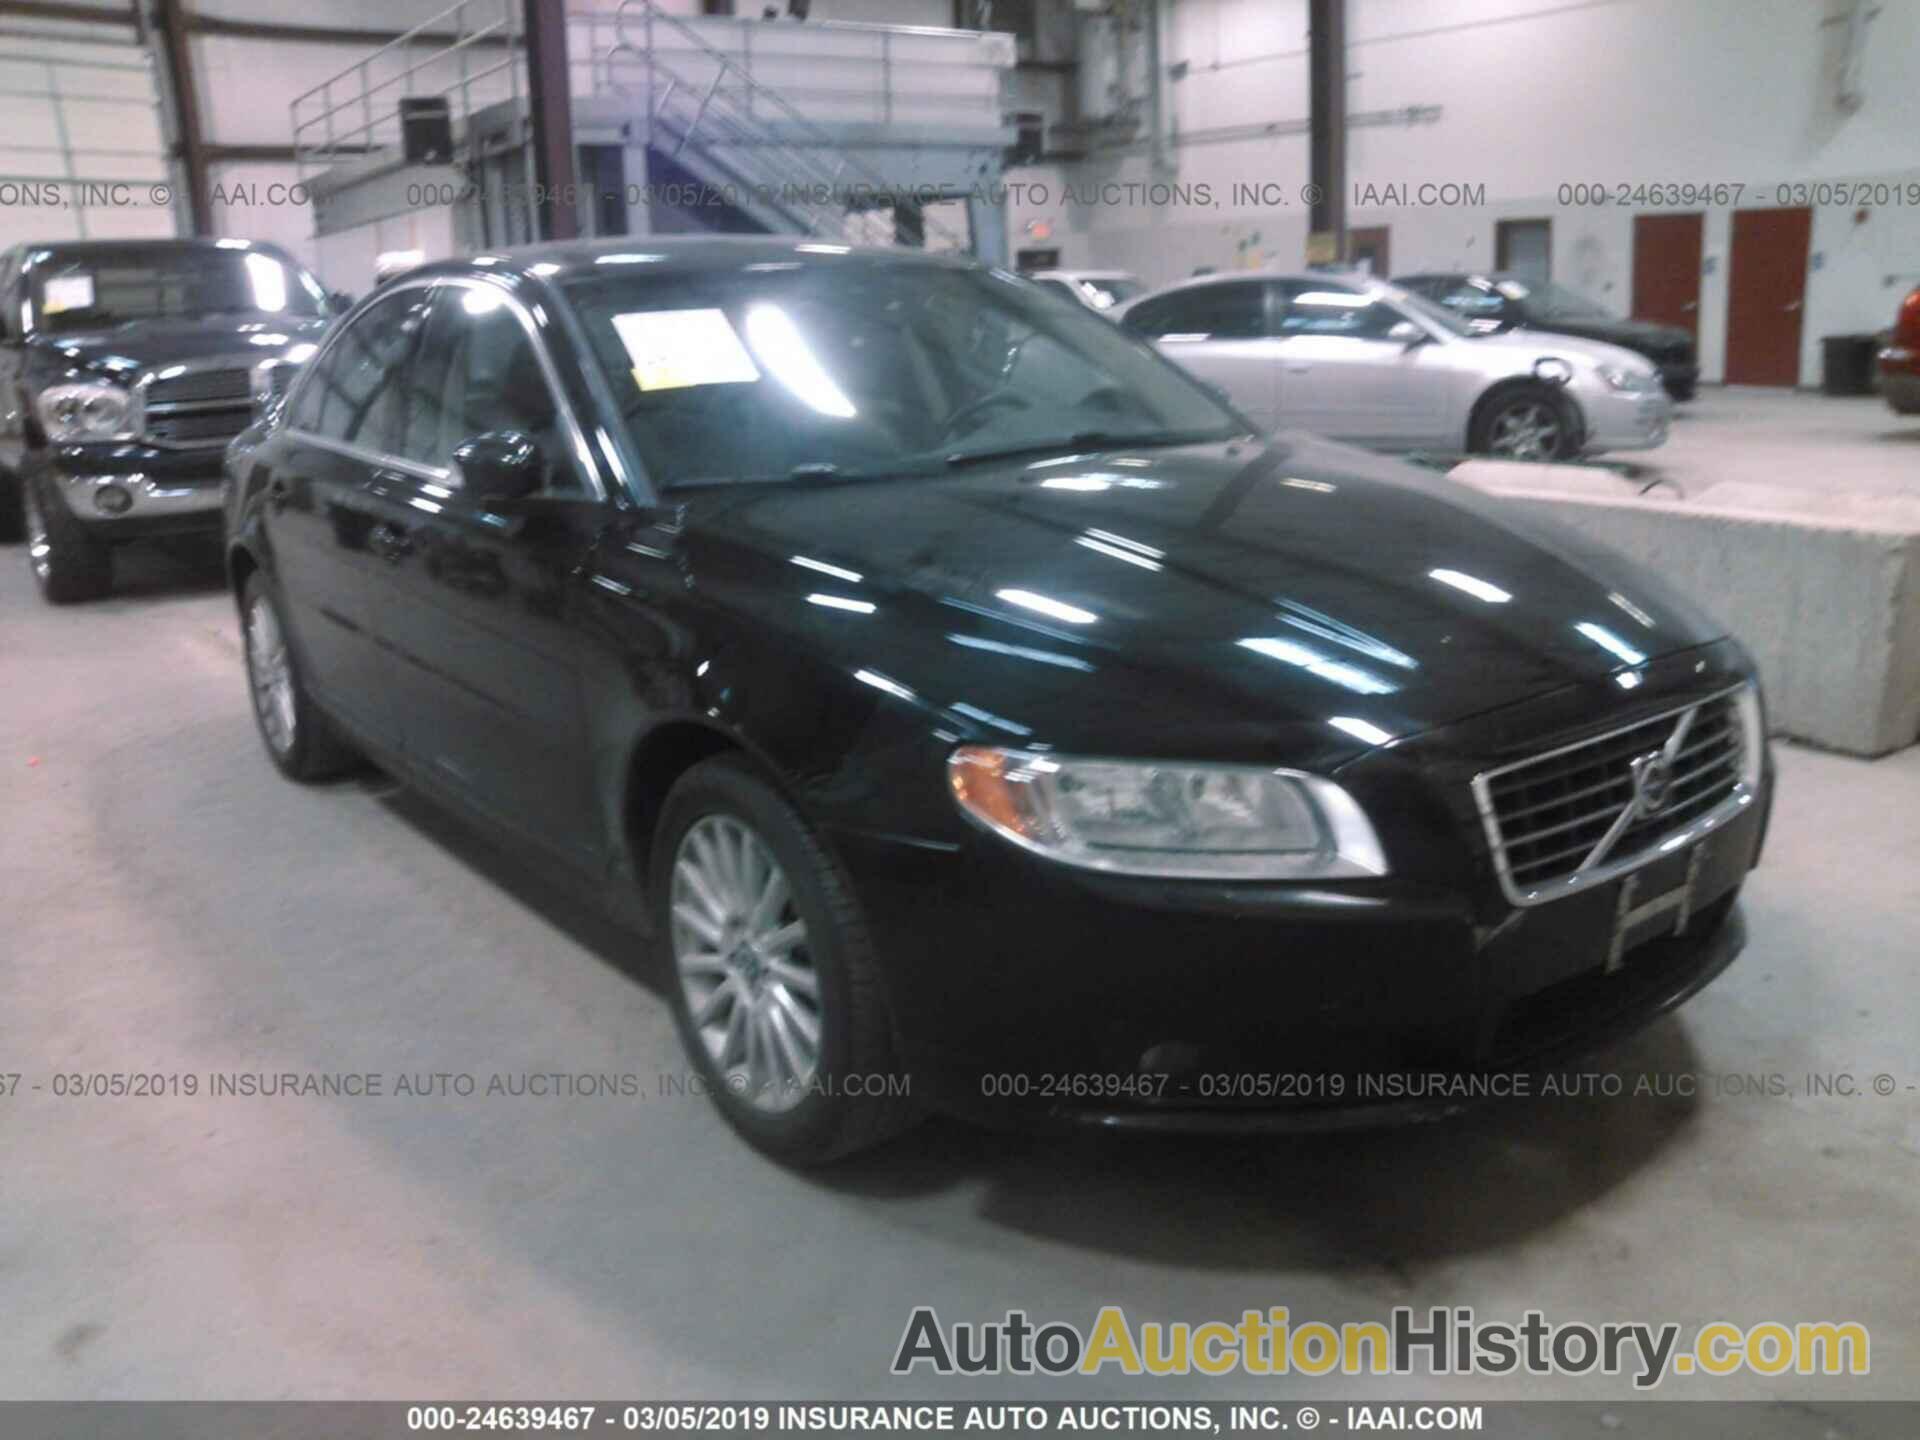 VOLVO S80 3.2, YV1AS982781070720